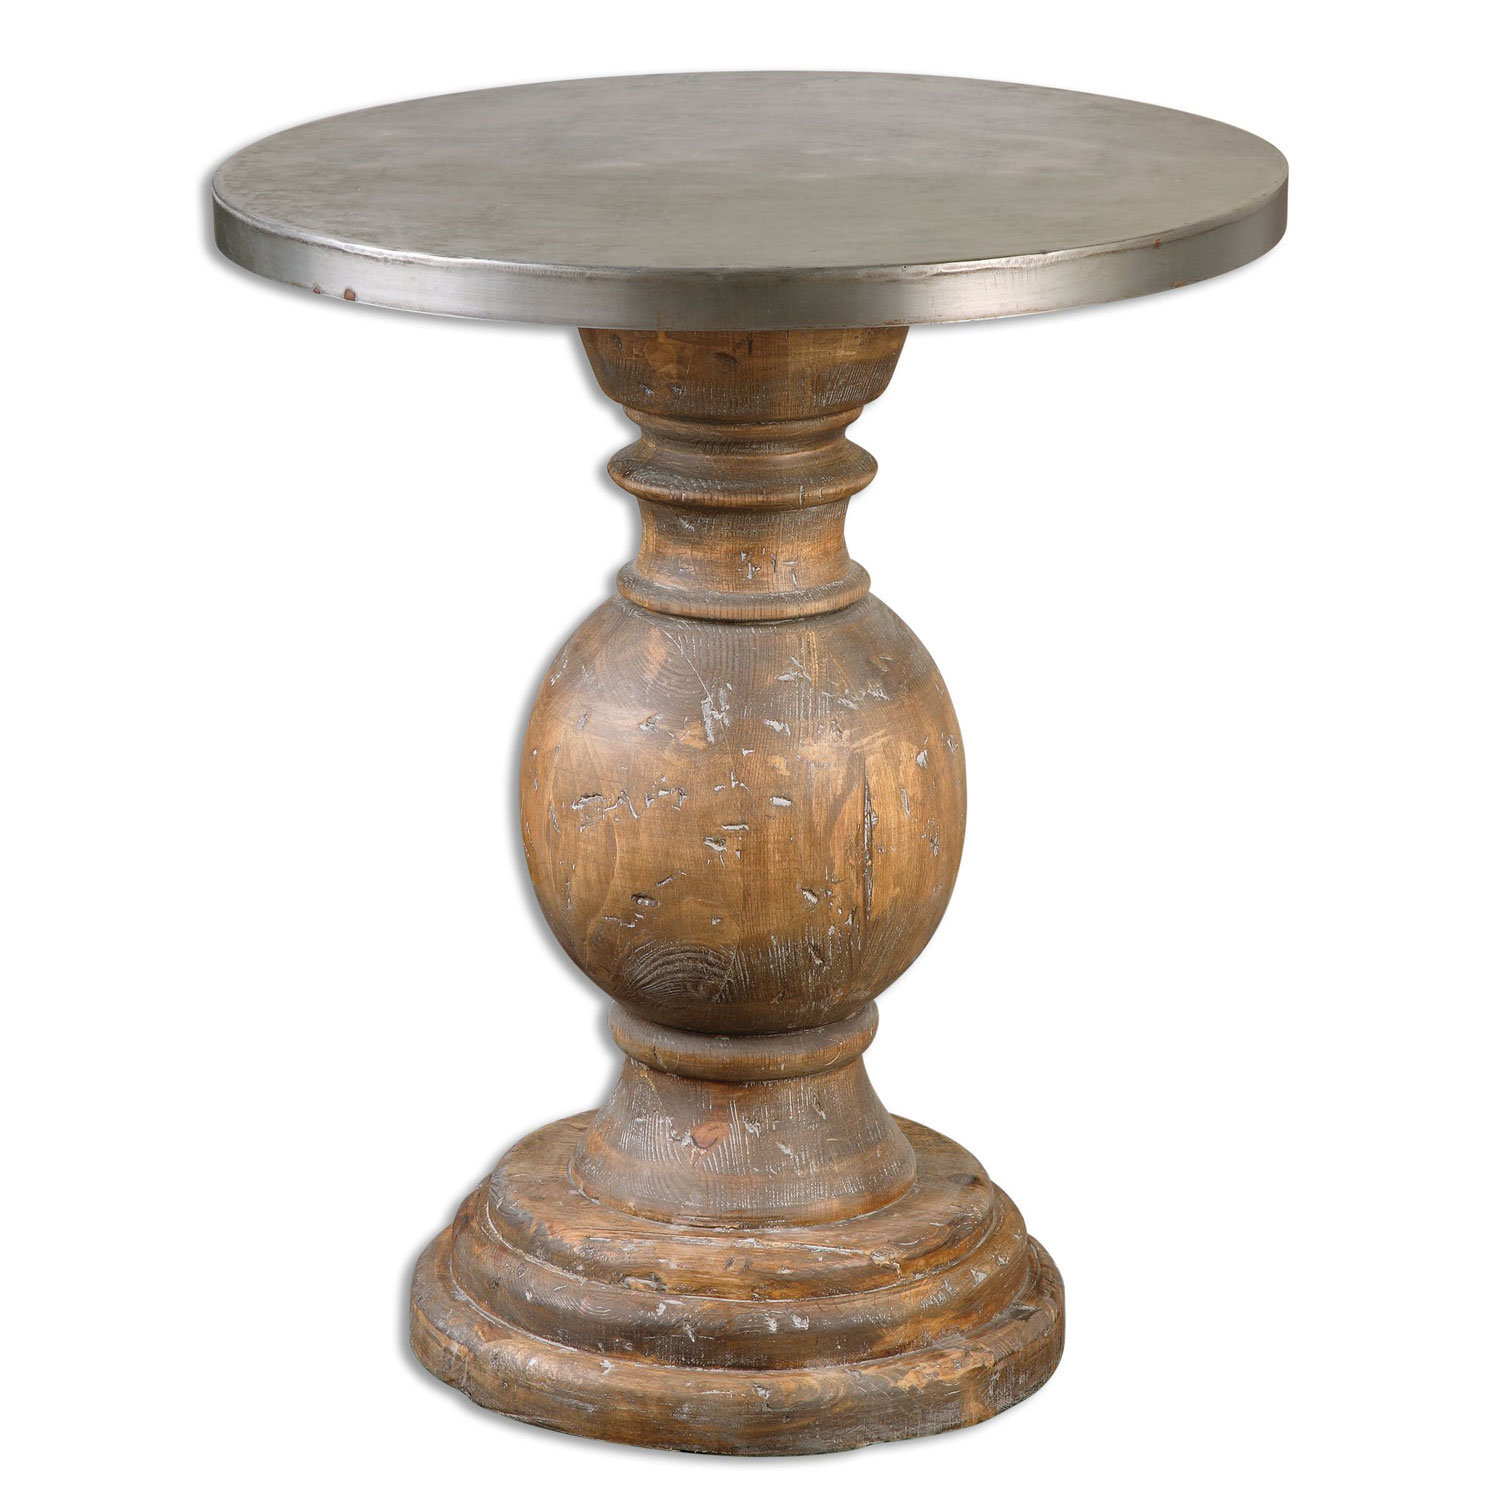 uttermost blythe reclaimed fir wood accent table bellacor pedestal hover zoom lacey furniture better homes and gardens west elm round mirror nautical globe lights mosaic patio